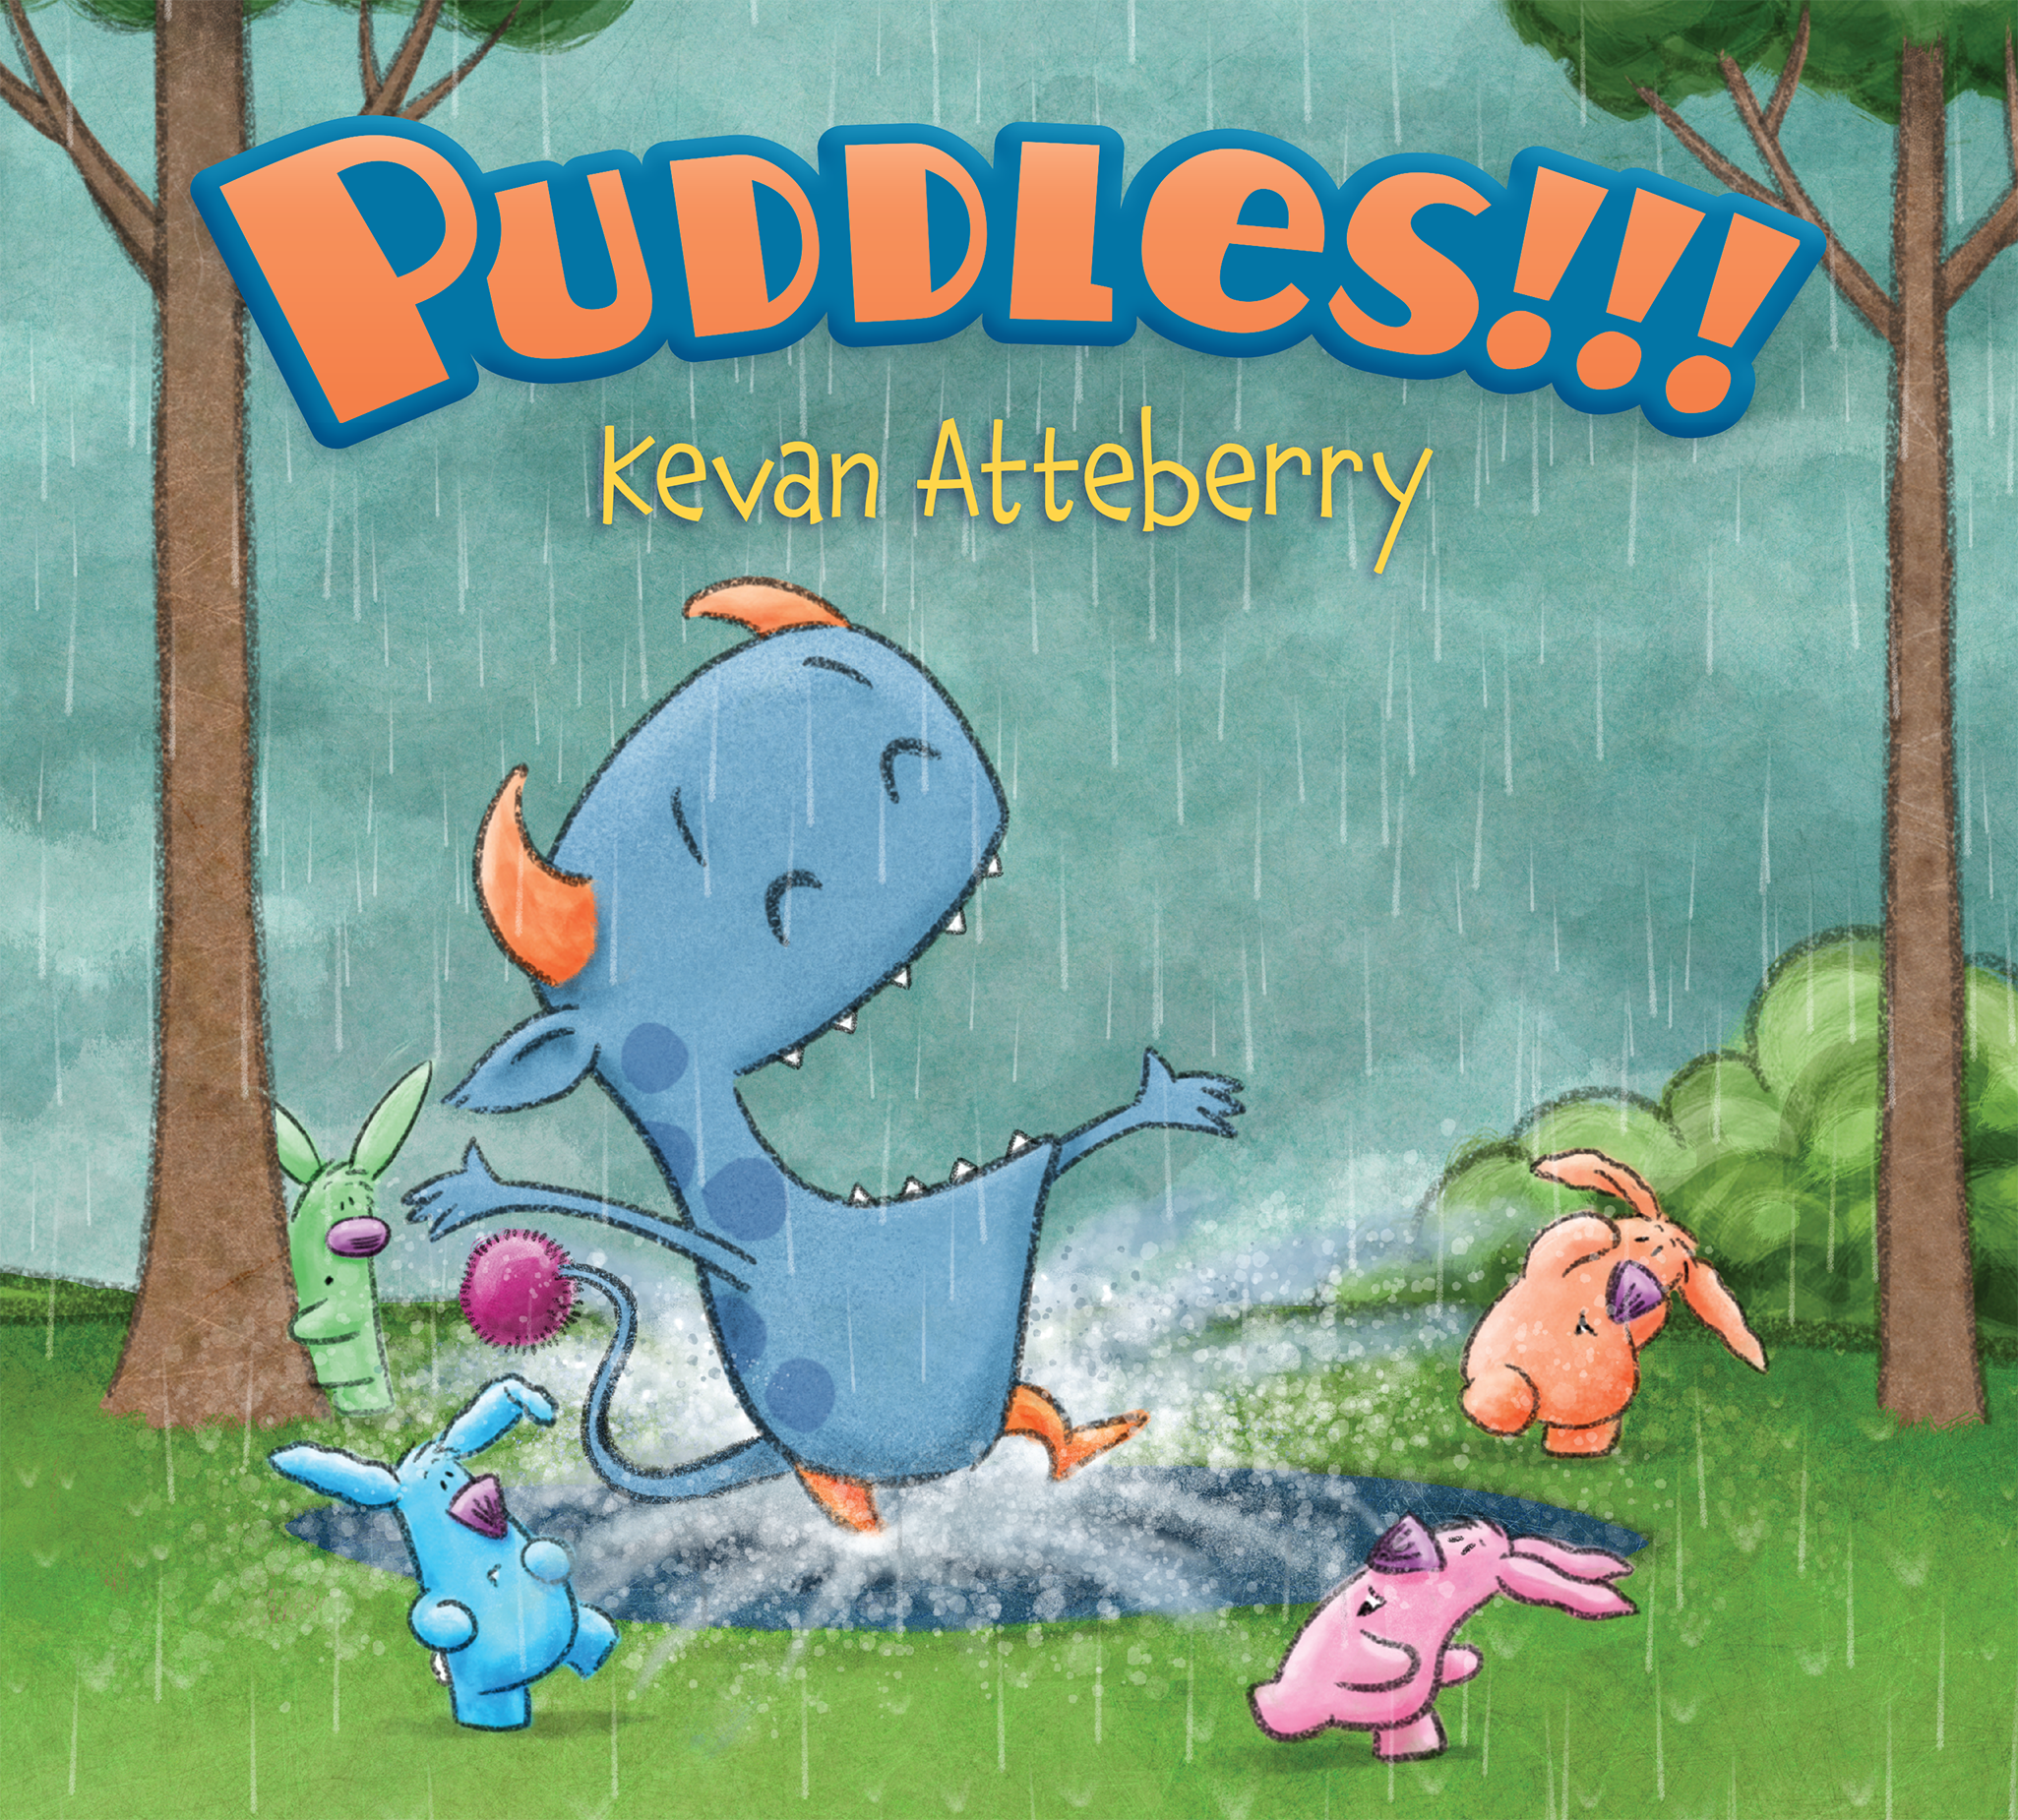 Puddles!!! by Kevan Atteberry